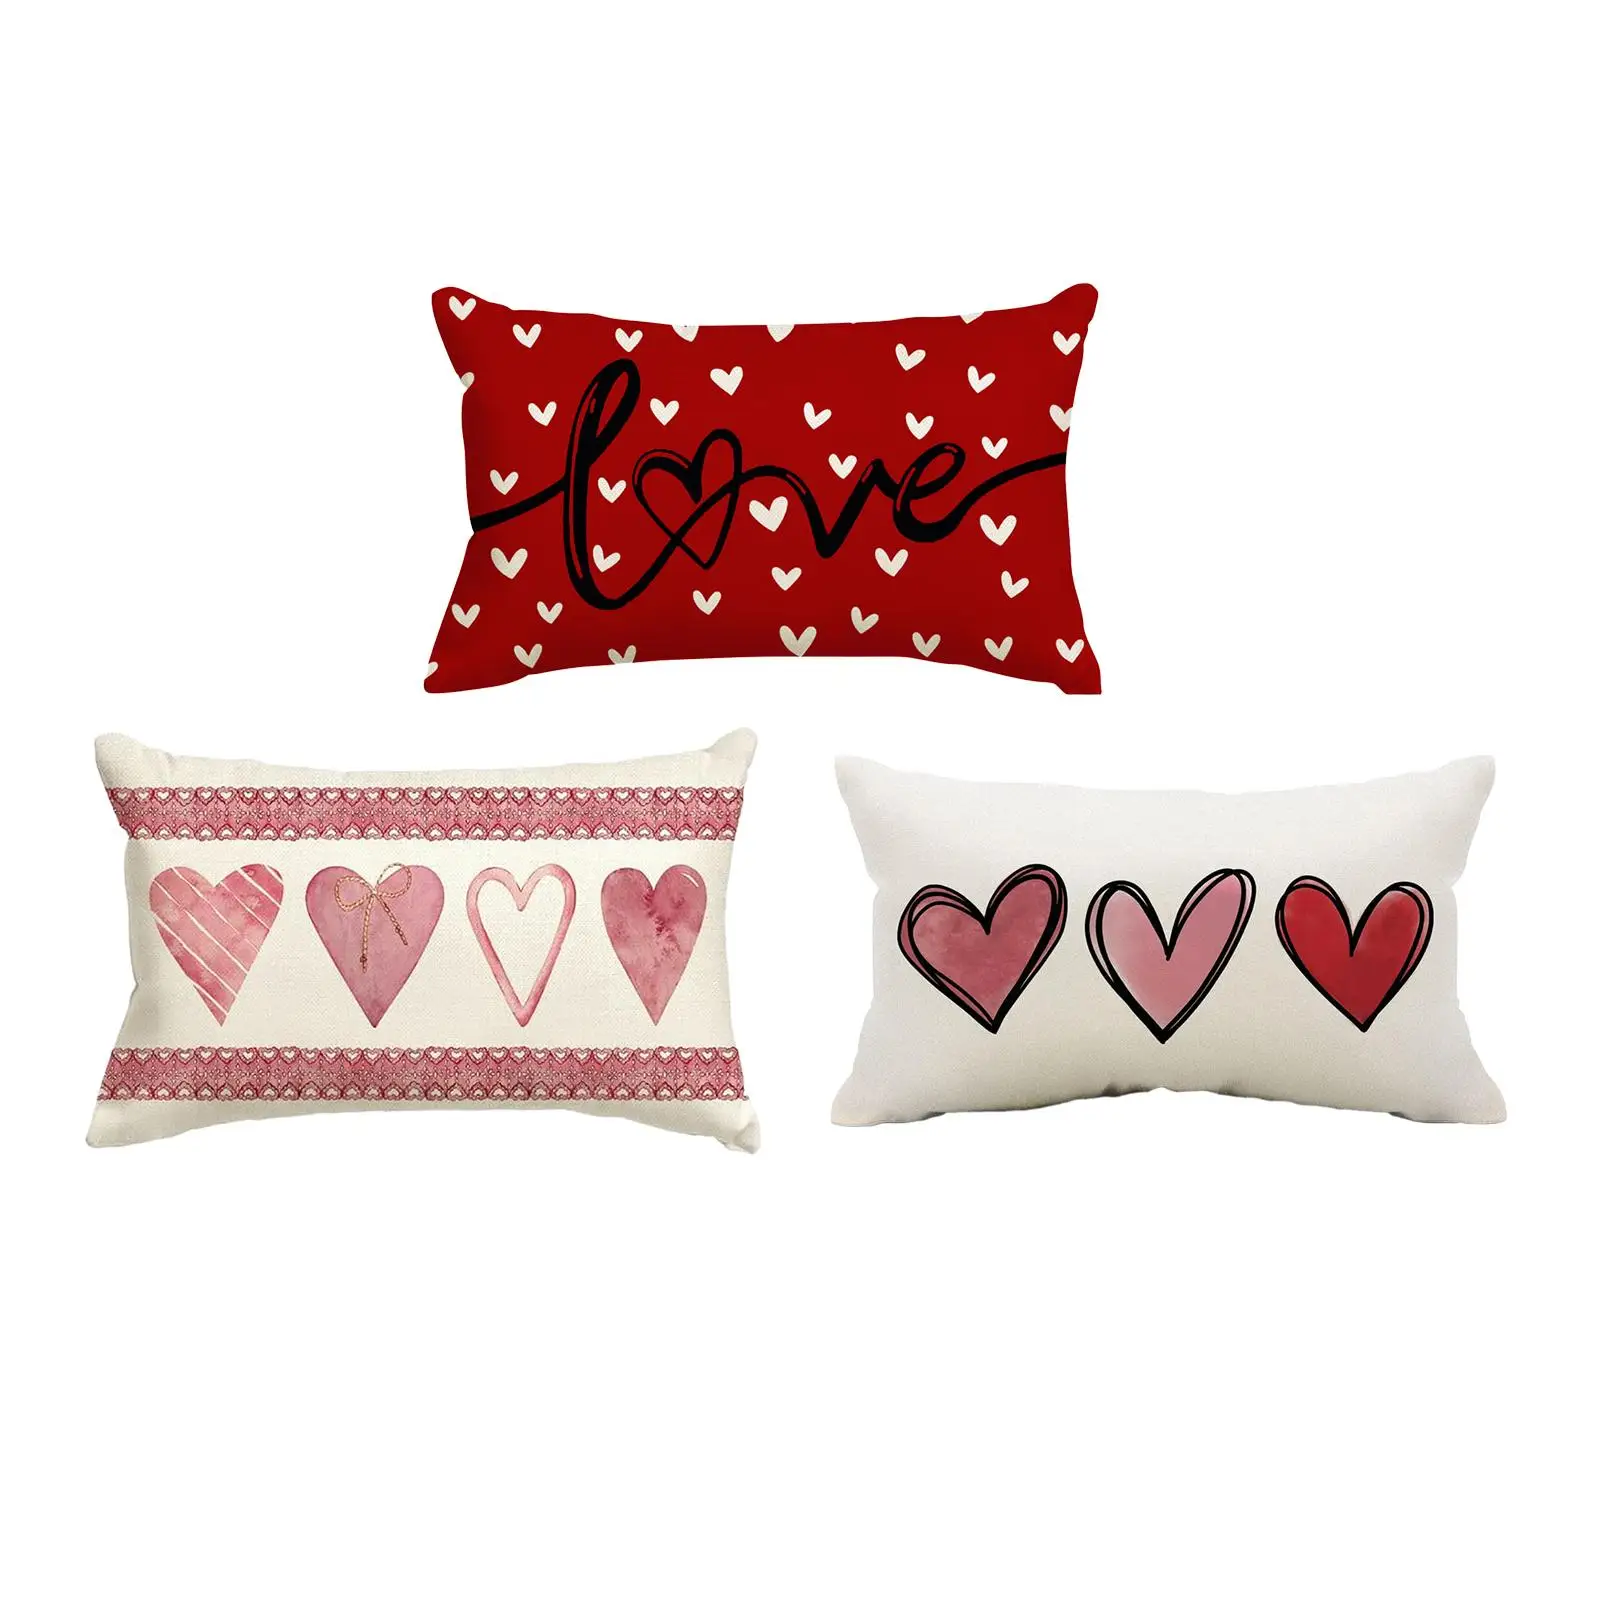 Valentines Day Pillow Cover Cushion Cover Decorative Love Heart Pillow Cover Cushion Cover for Bedroom Party Festival Wedding